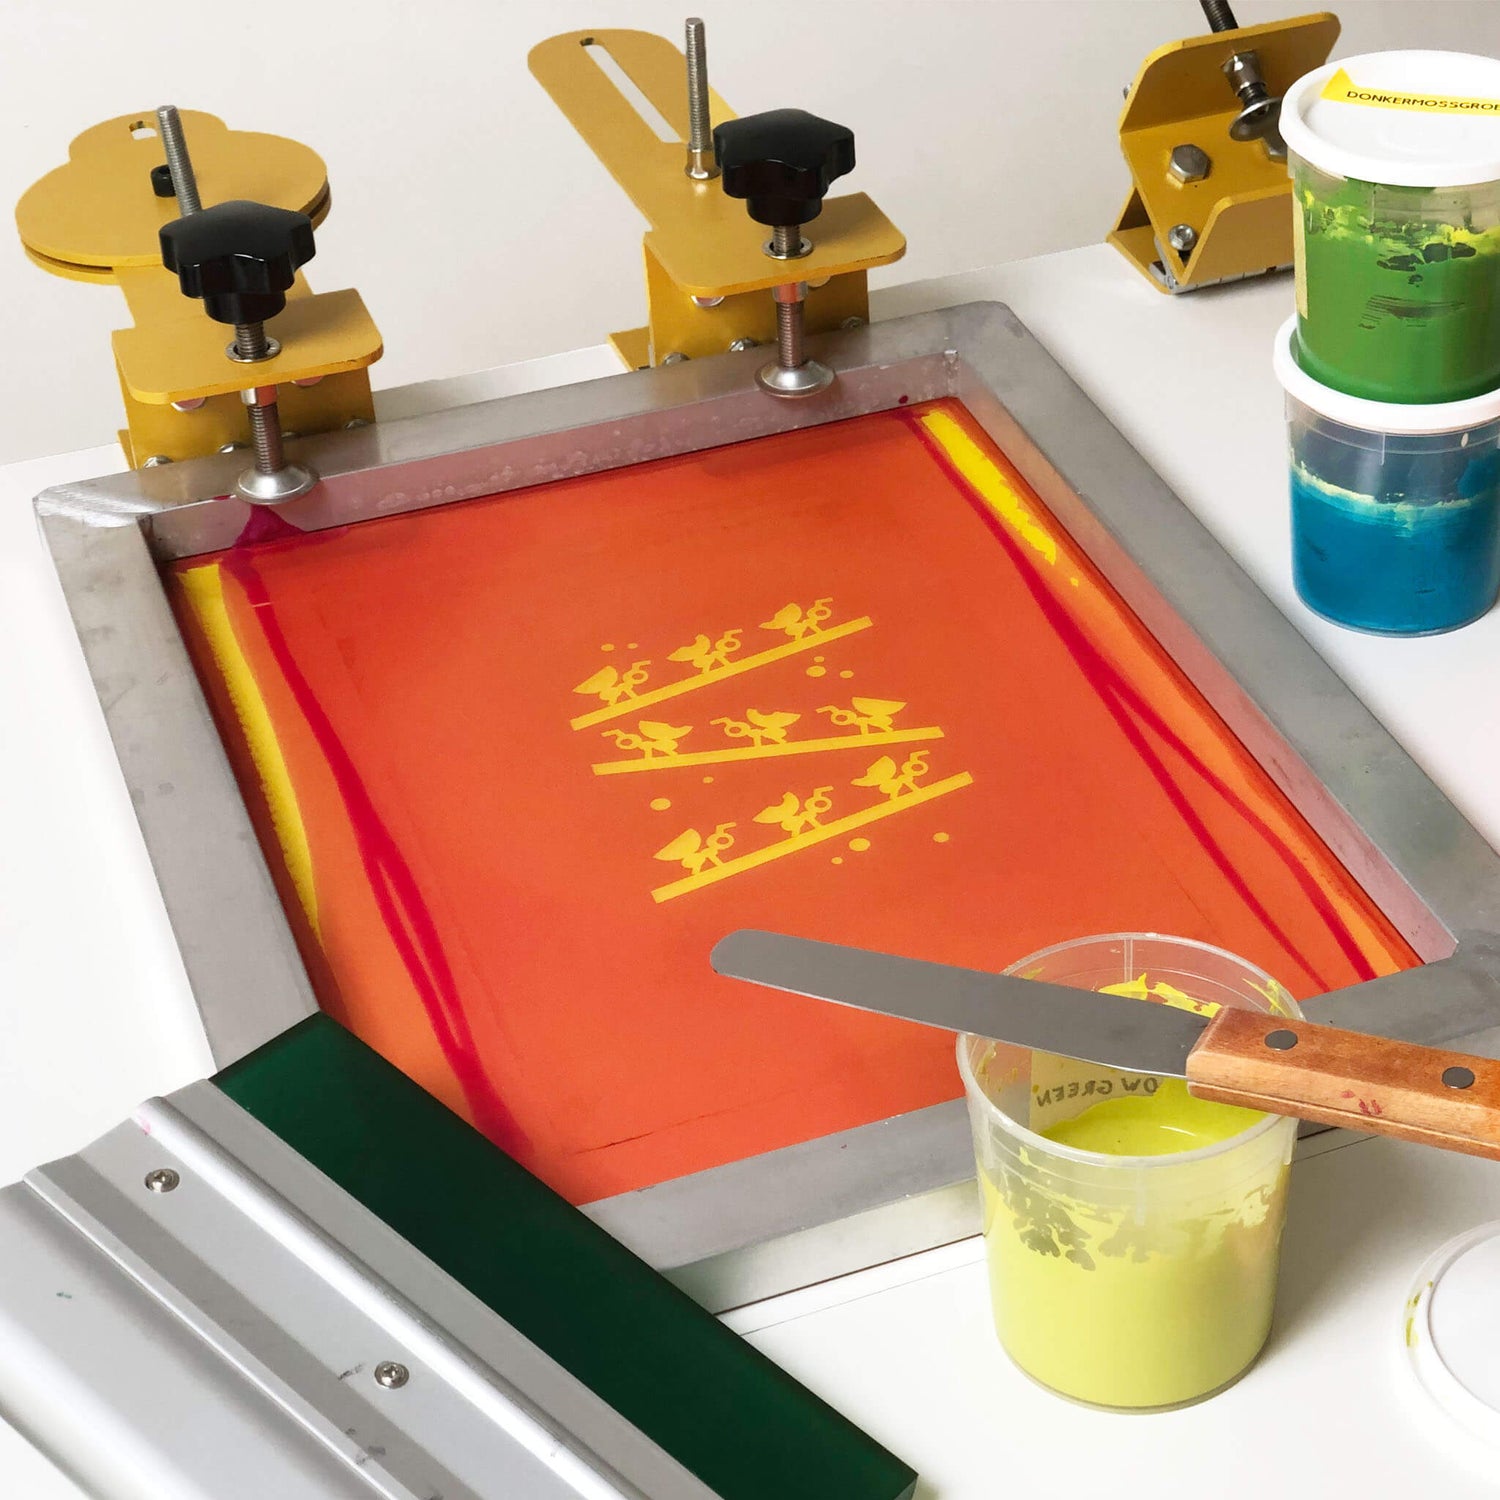 Screenprint supplies arranged on a table: a framed screen, a squeegee,  and three containers of three colored inks (green, blue, and yellow)  alongside. An open yellow ink container has a spatula on top.